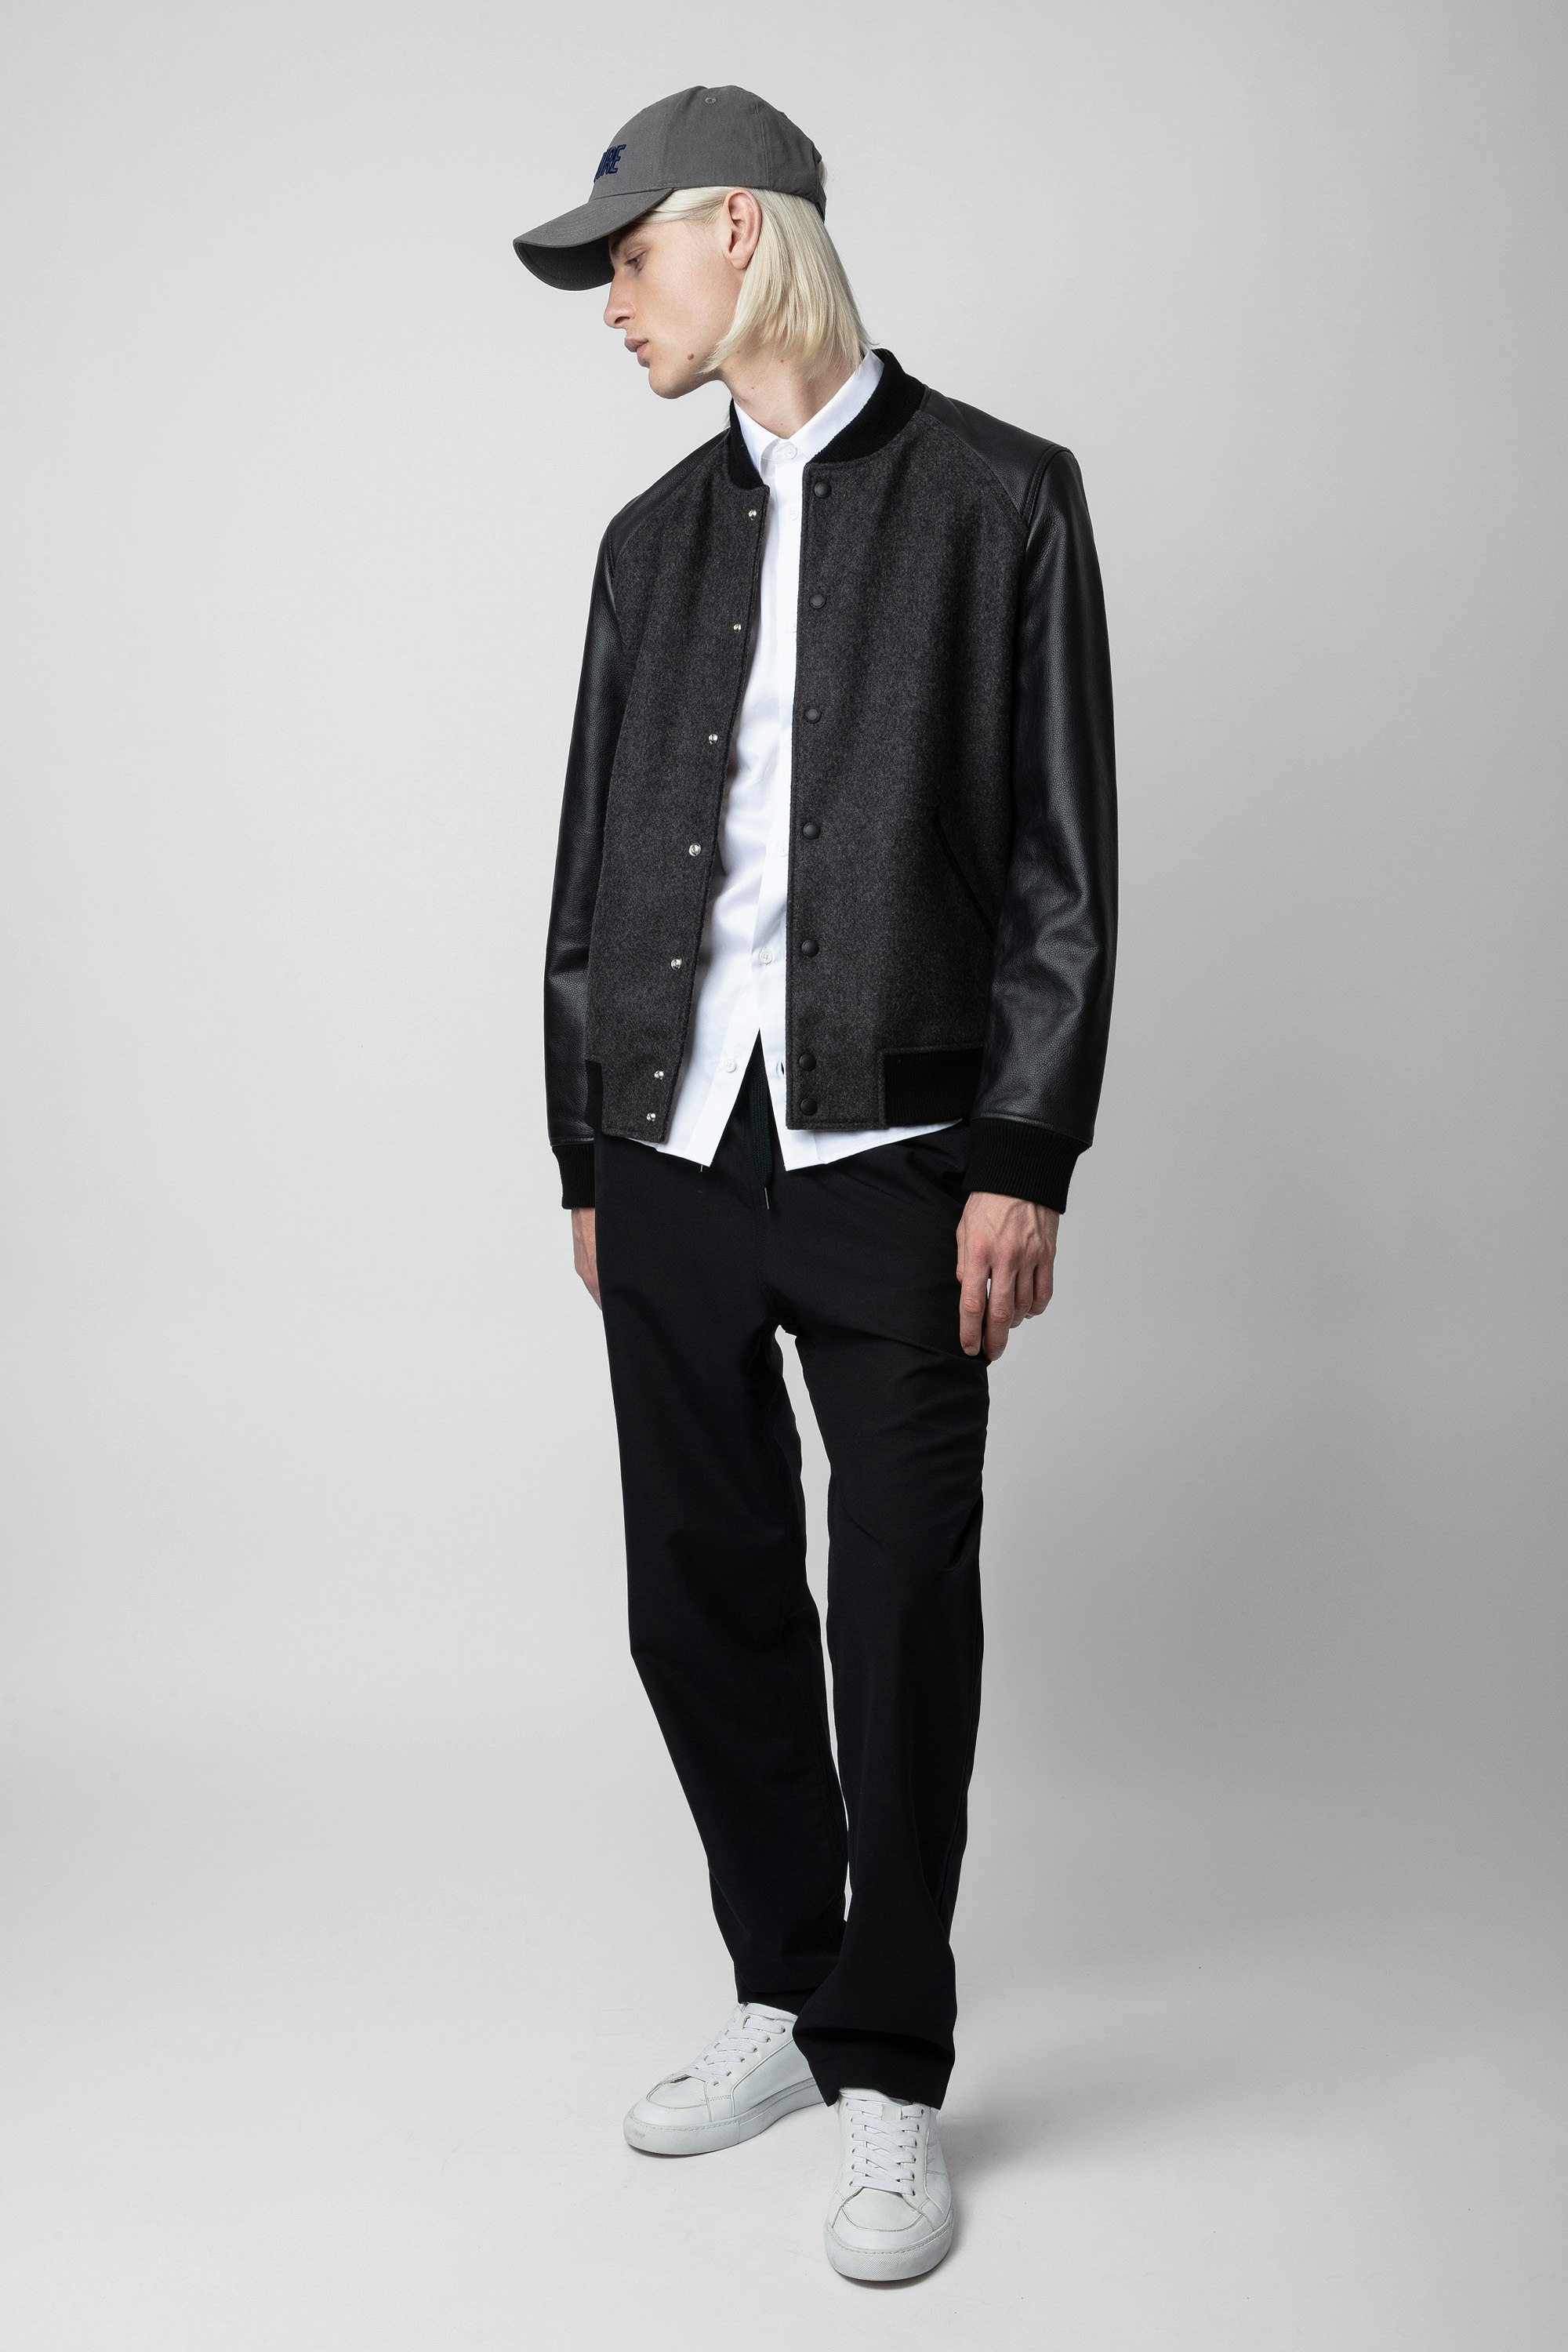 Birdeh Jacket - Men’s anthracite grey leather and wool jacket with “Voltaire” patch on the back.